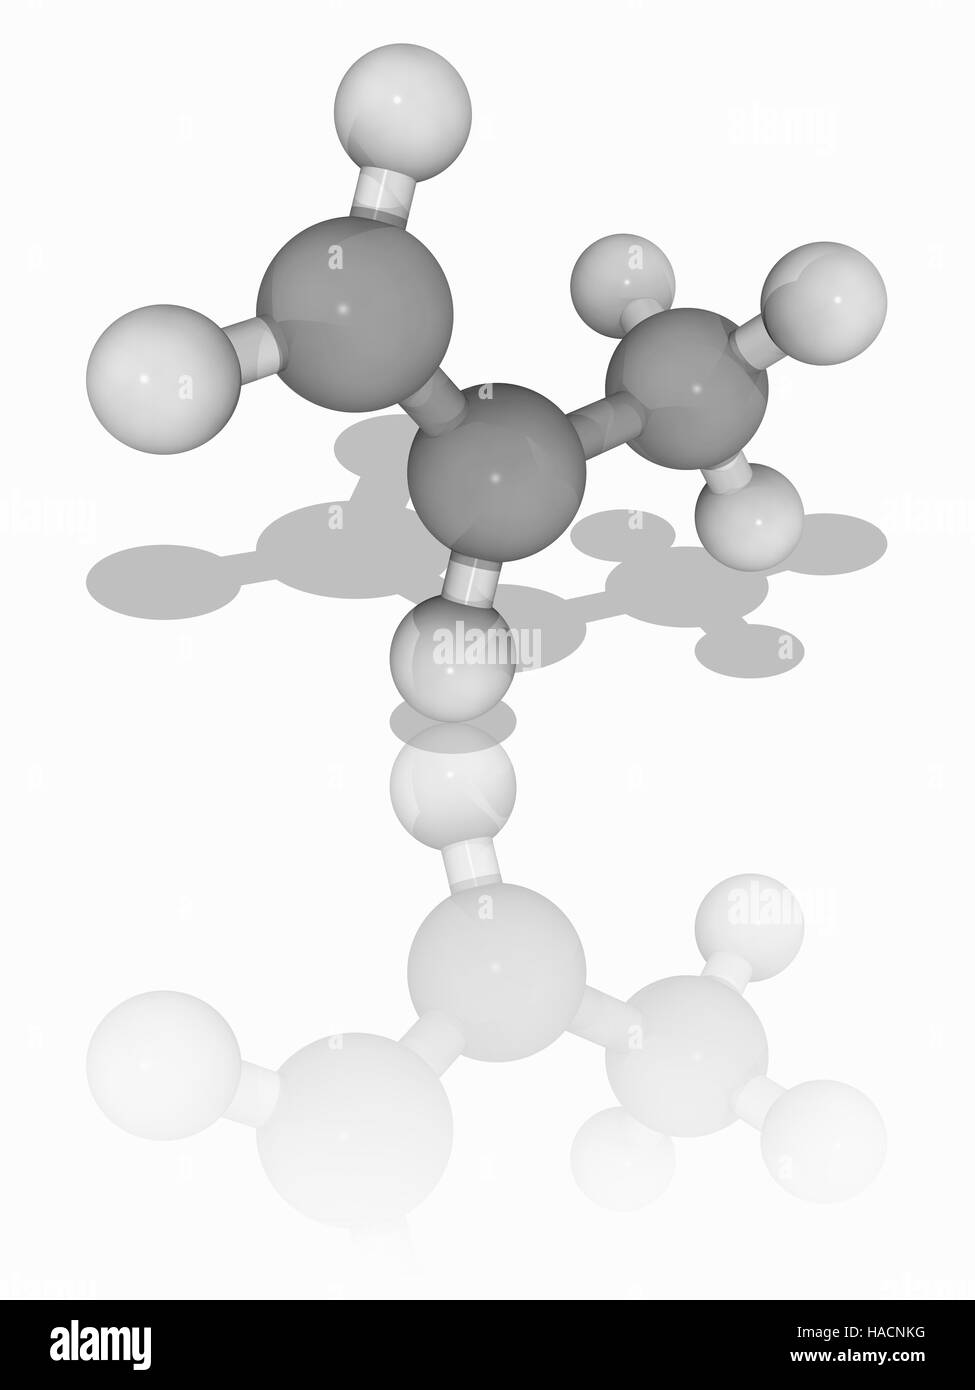 Propene. Molecular model of the alkene gas propene (C3.H6), also known as propylene or methylethylene. This unsaturated organic compound is produced from petroleum and natural gas. It is a raw material for a wide variety of chemical products. Atoms are represented as spheres and are colour-coded: carbon (grey) and hydrogen (white). Illustration. Stock Photo